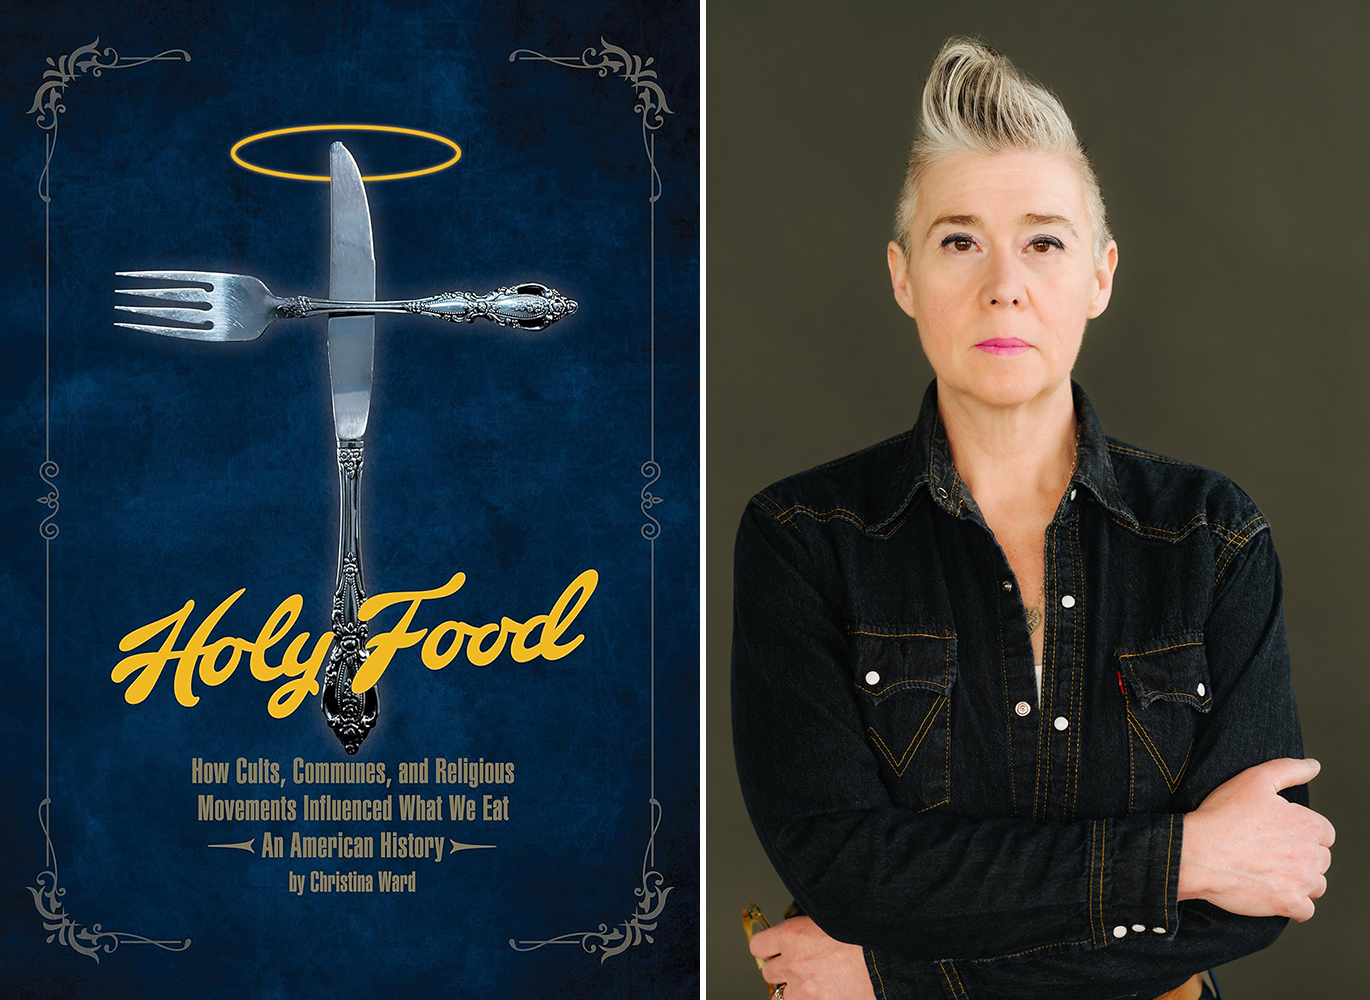 "Holy Food: How Cults, Communes, and Religious Movements Influenced What We Eat" and author Christina Ward. Courtesy images